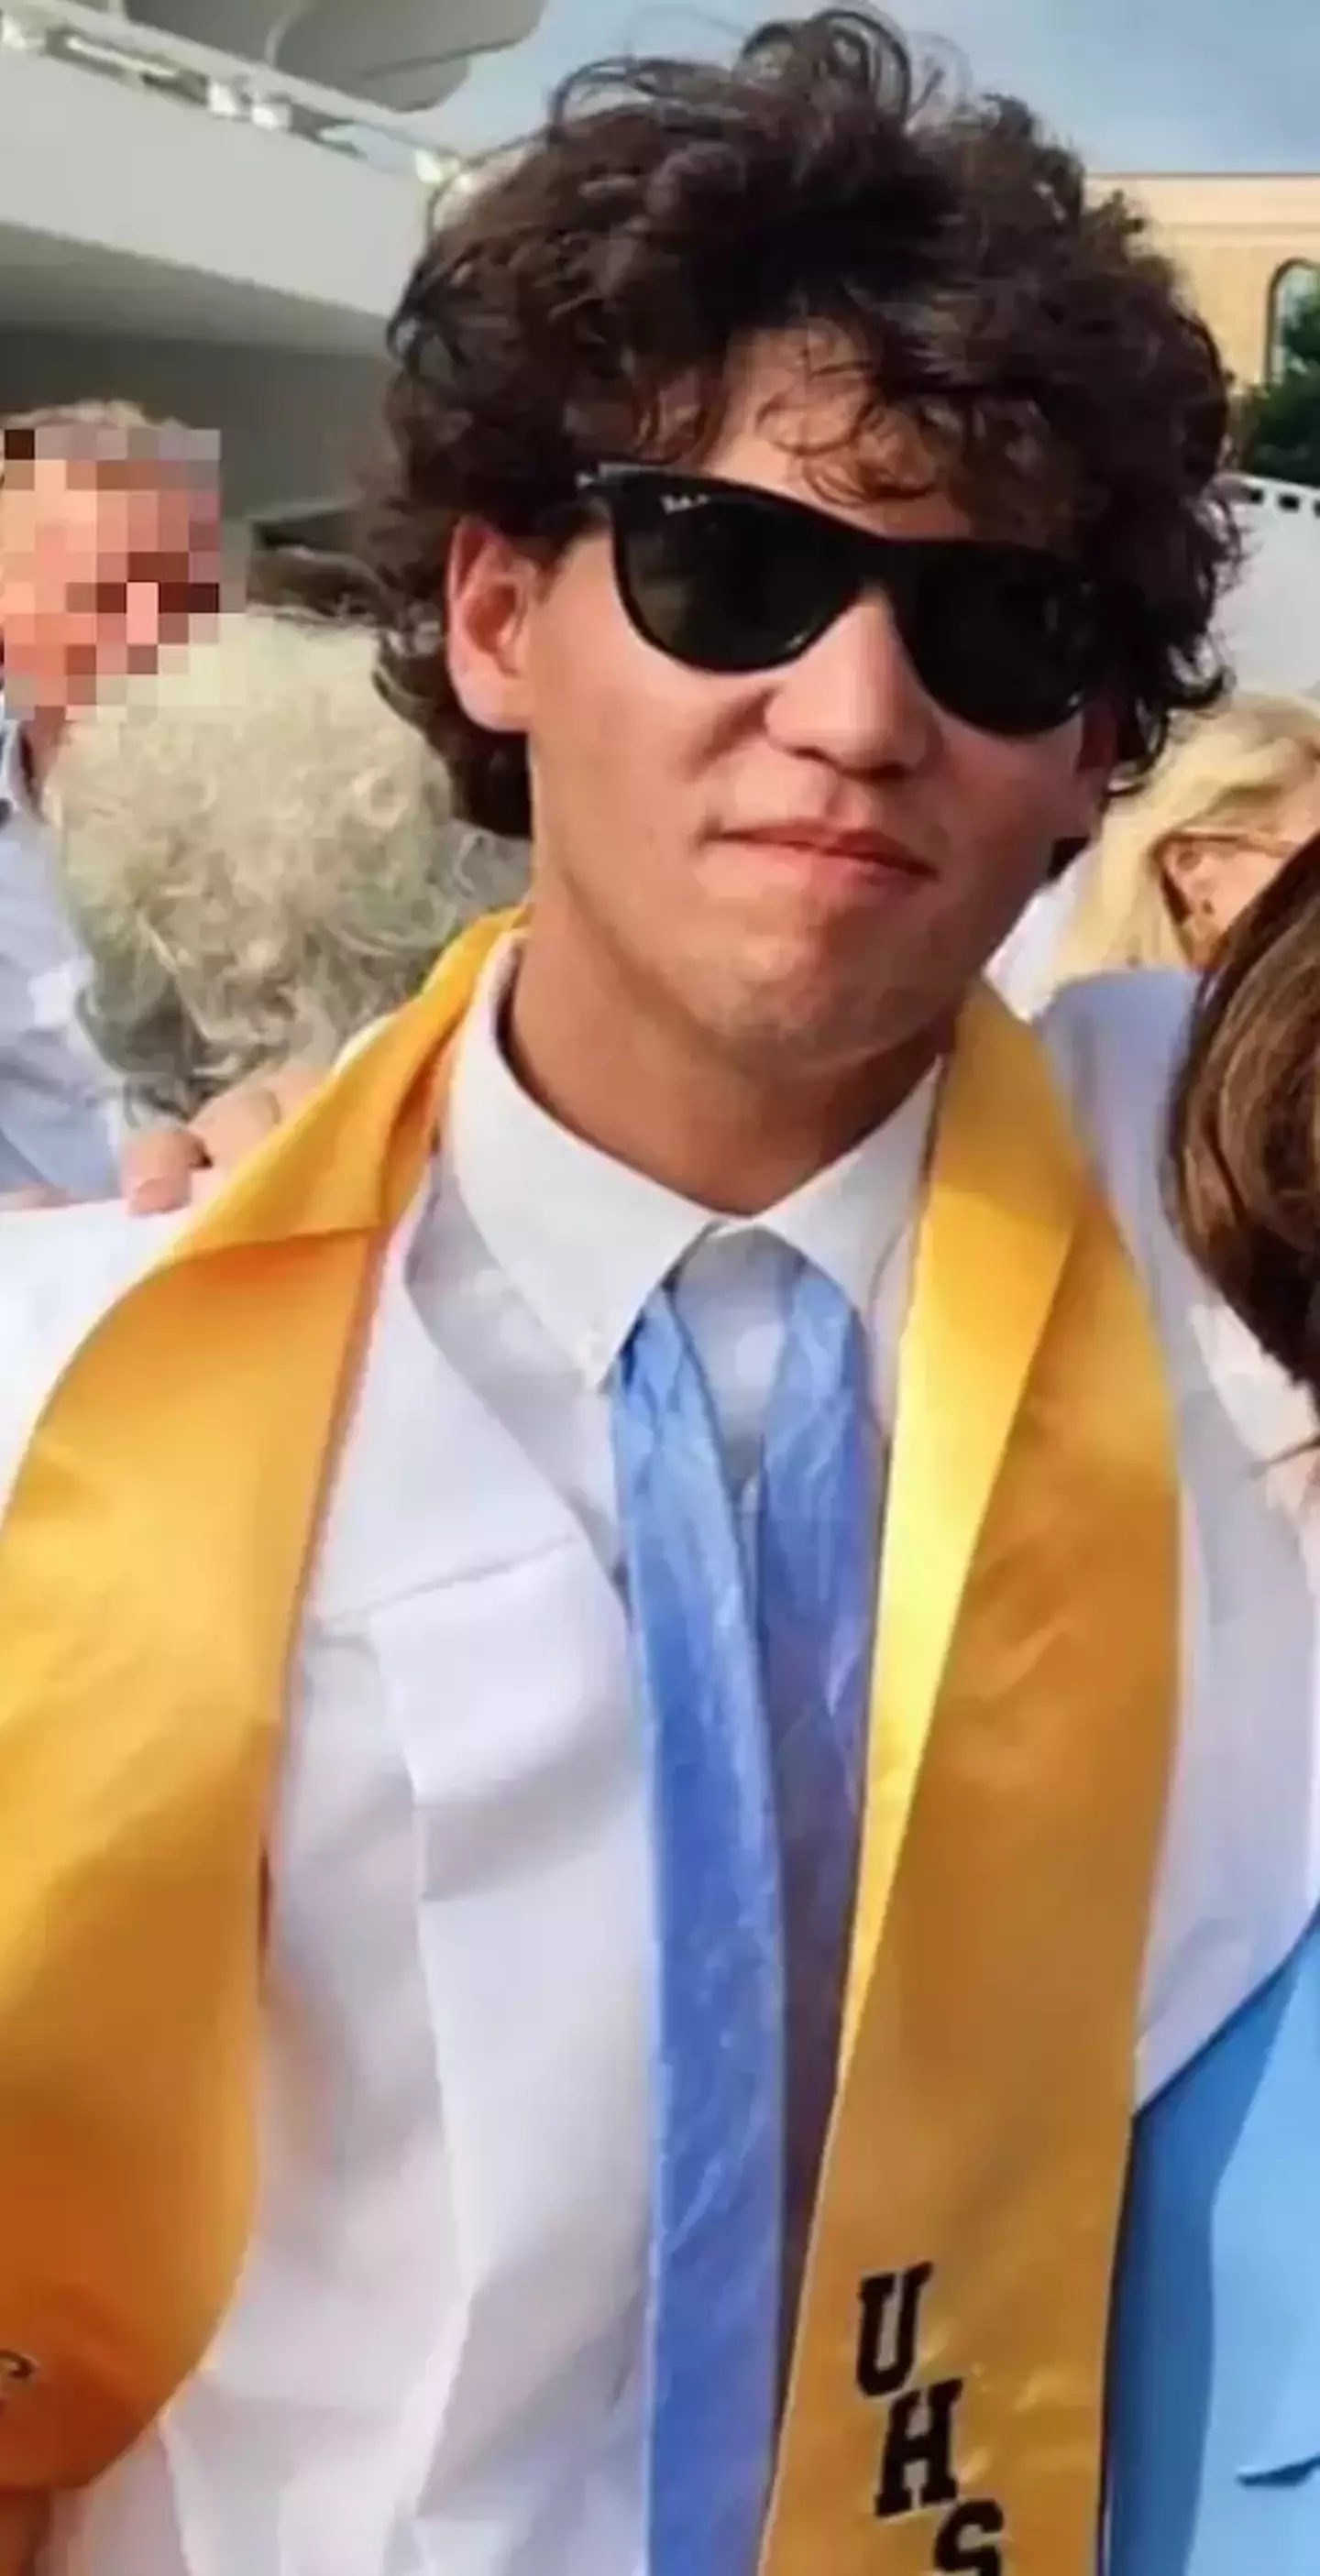 Cameron Robbins recently graduated from high school.